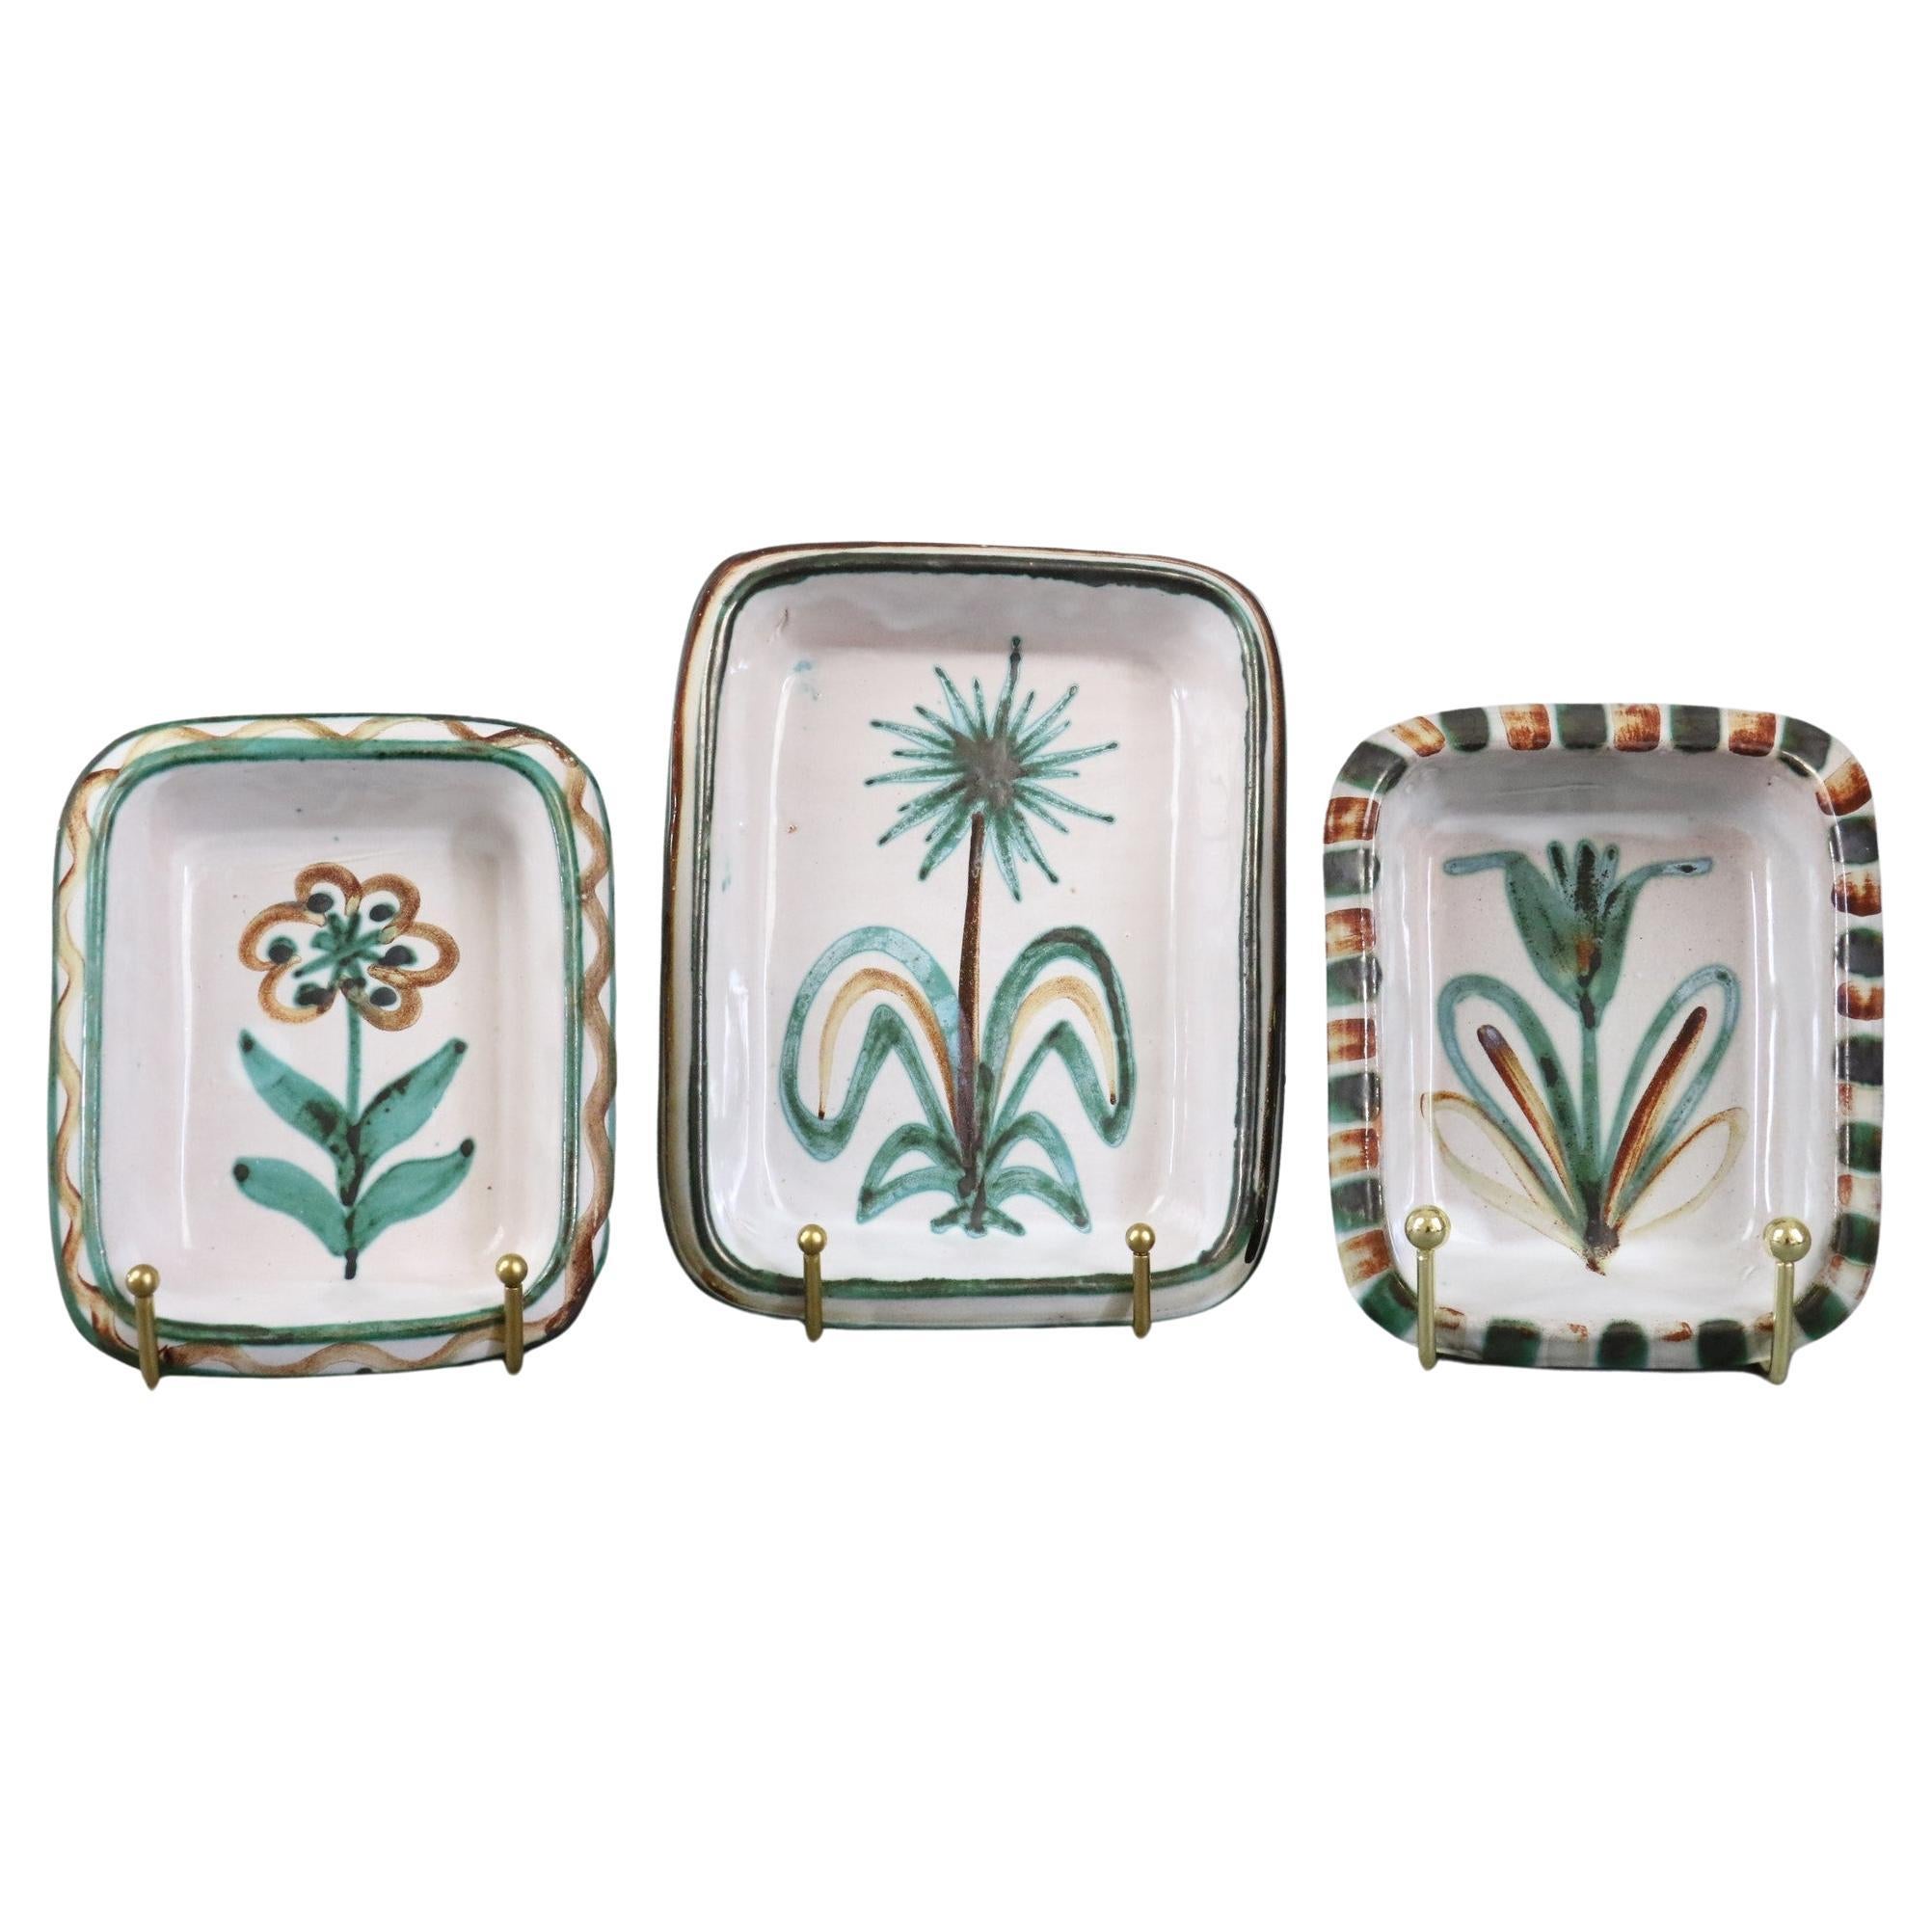 Set of 3 Ceramic Dishes by Robert Picault, Vallauris, French Ceramic, 1950's For Sale